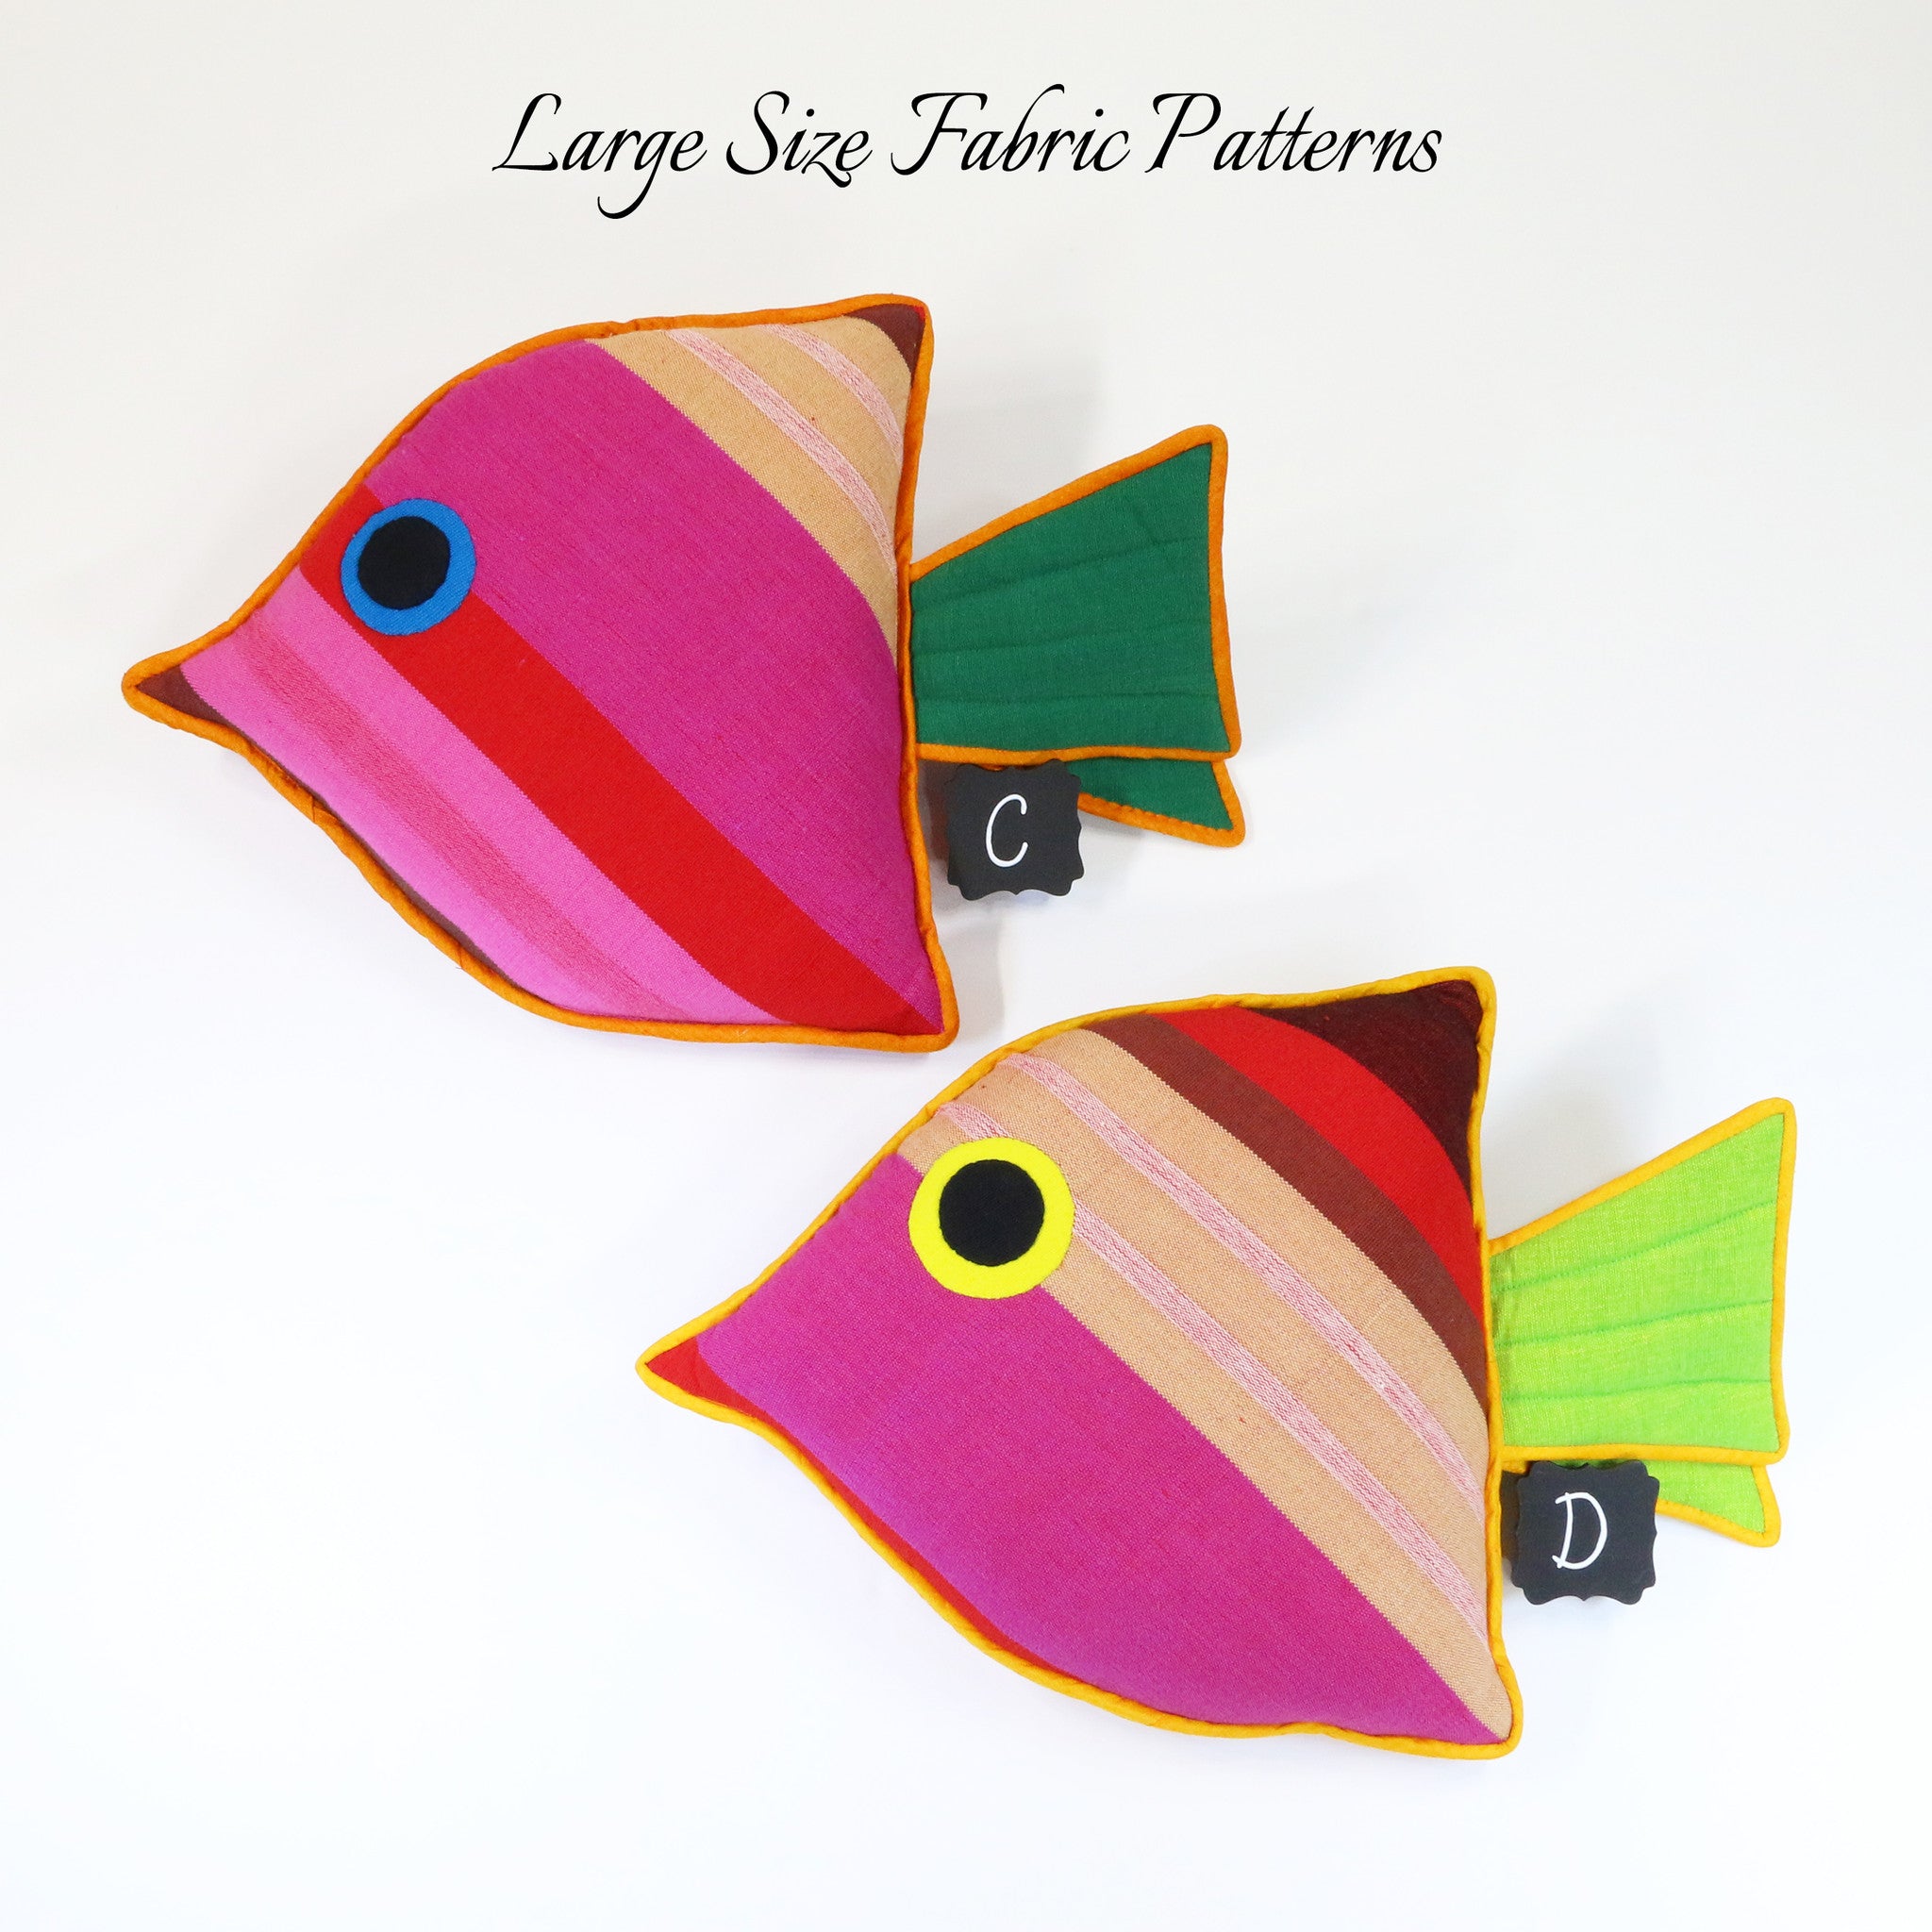 Lily, the Juvenile Fish – large size fabric patterns shown